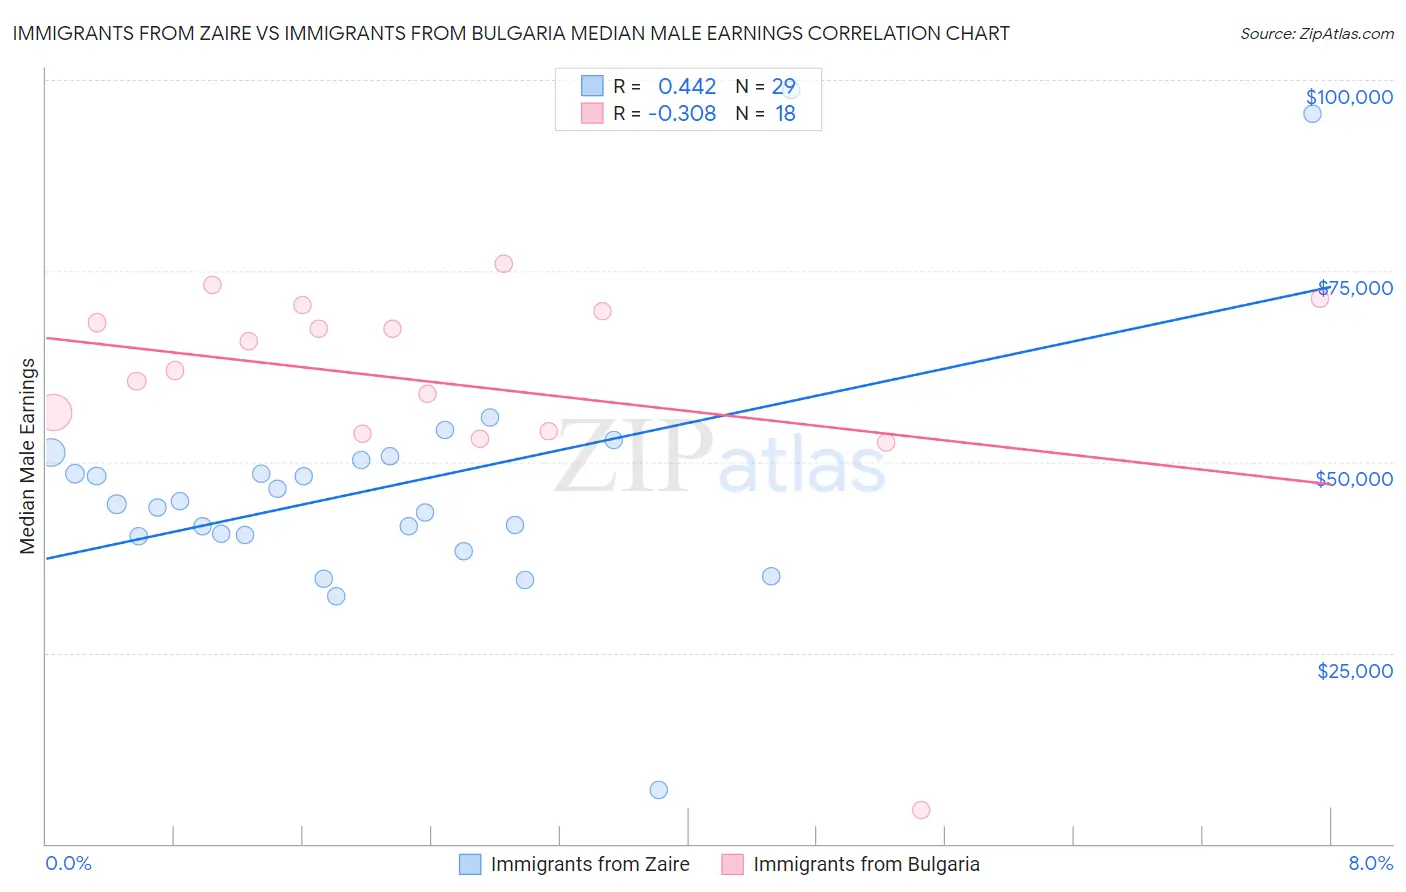 Immigrants from Zaire vs Immigrants from Bulgaria Median Male Earnings